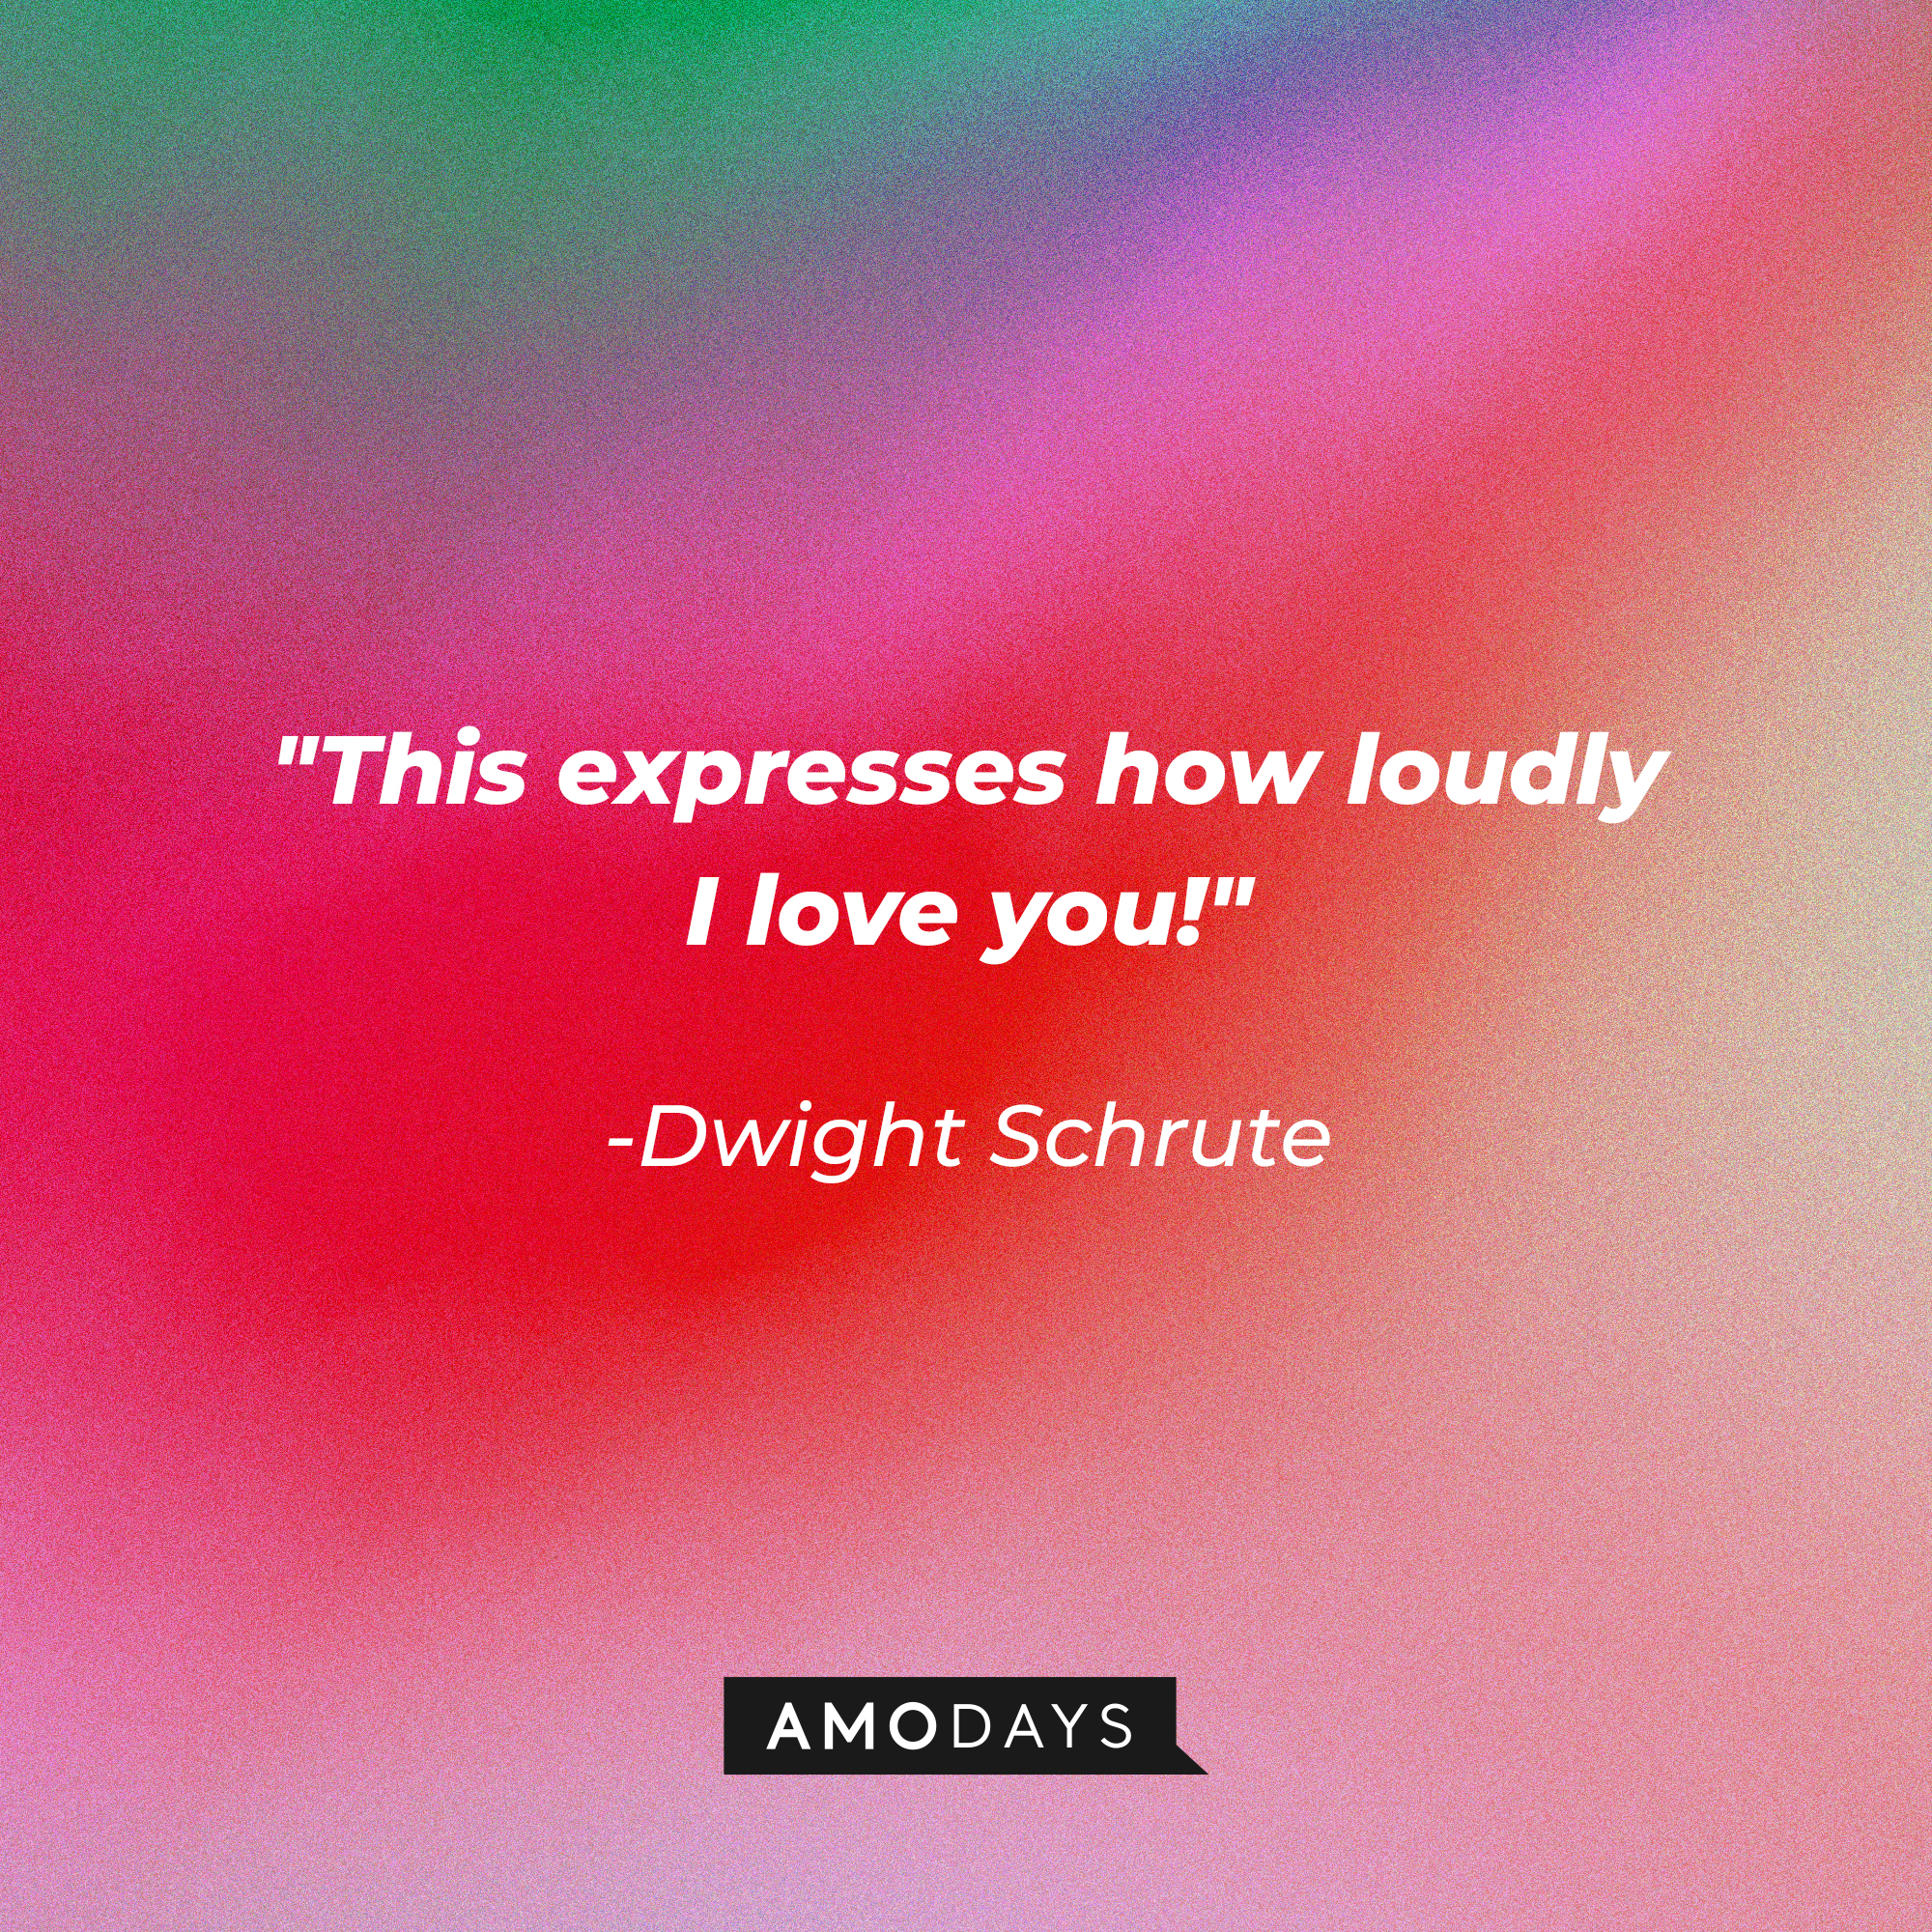 Dwight Schrute’s quote: "This expresses how loudly I love you! " | Image: AmoDays